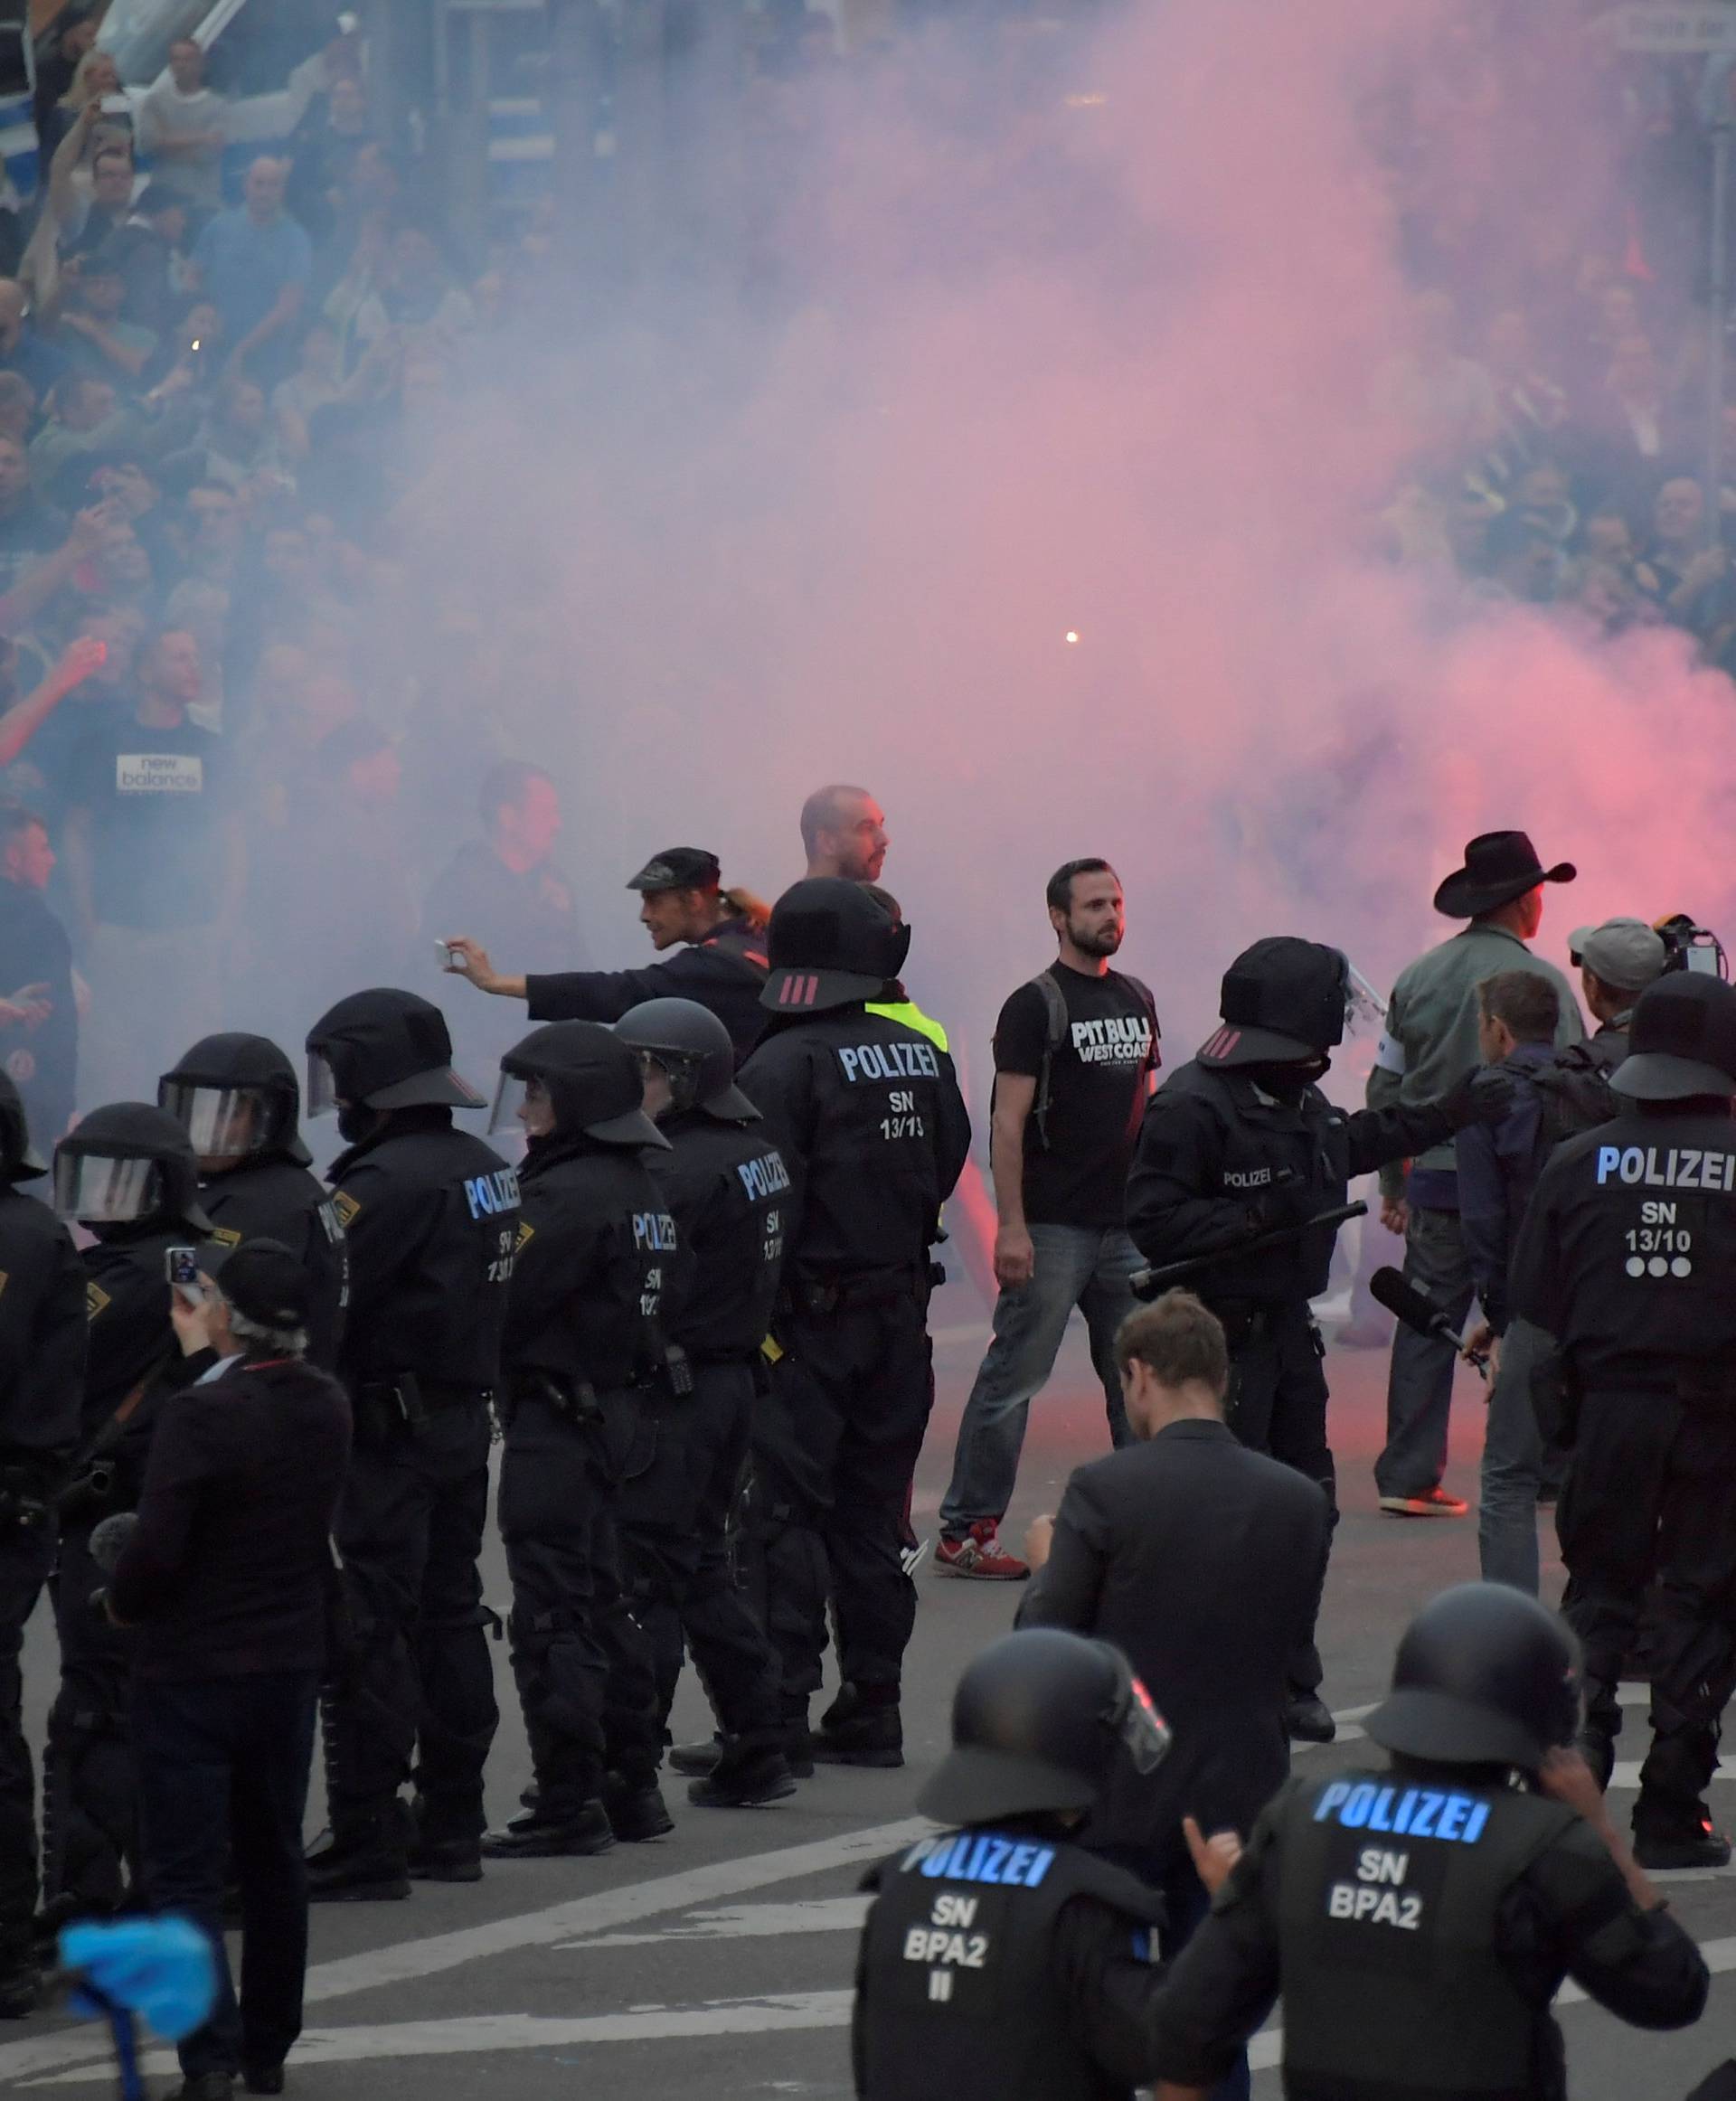 Riot policemen stand guard as the right-wing supporters protest after a German man was stabbed last weekend in Chemnitz